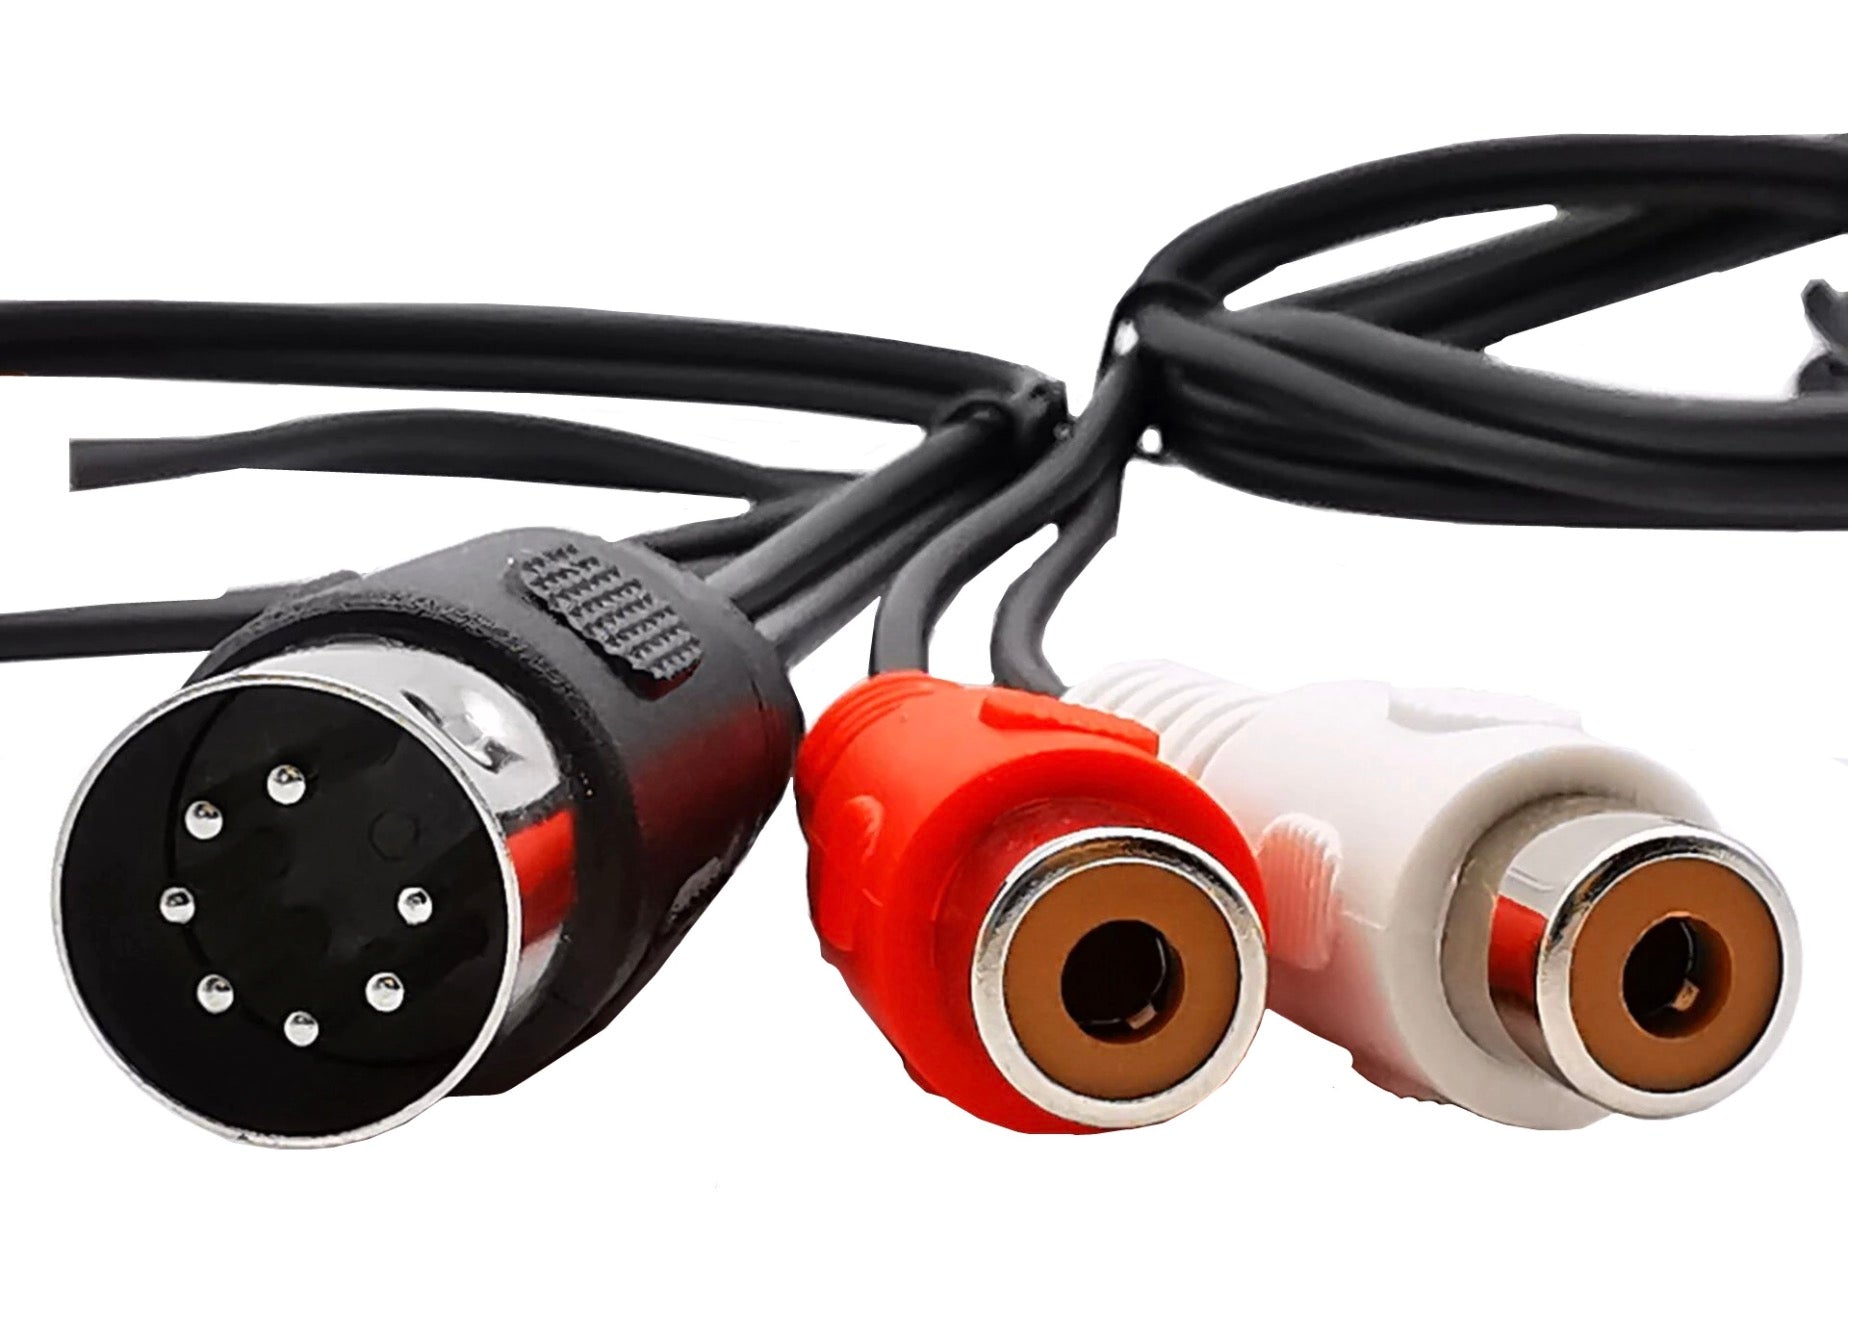 7Pin Din Male to 2 RCA Female Audio Cable for Bang & Olufsen, Naim, Quad.Stereo Systems